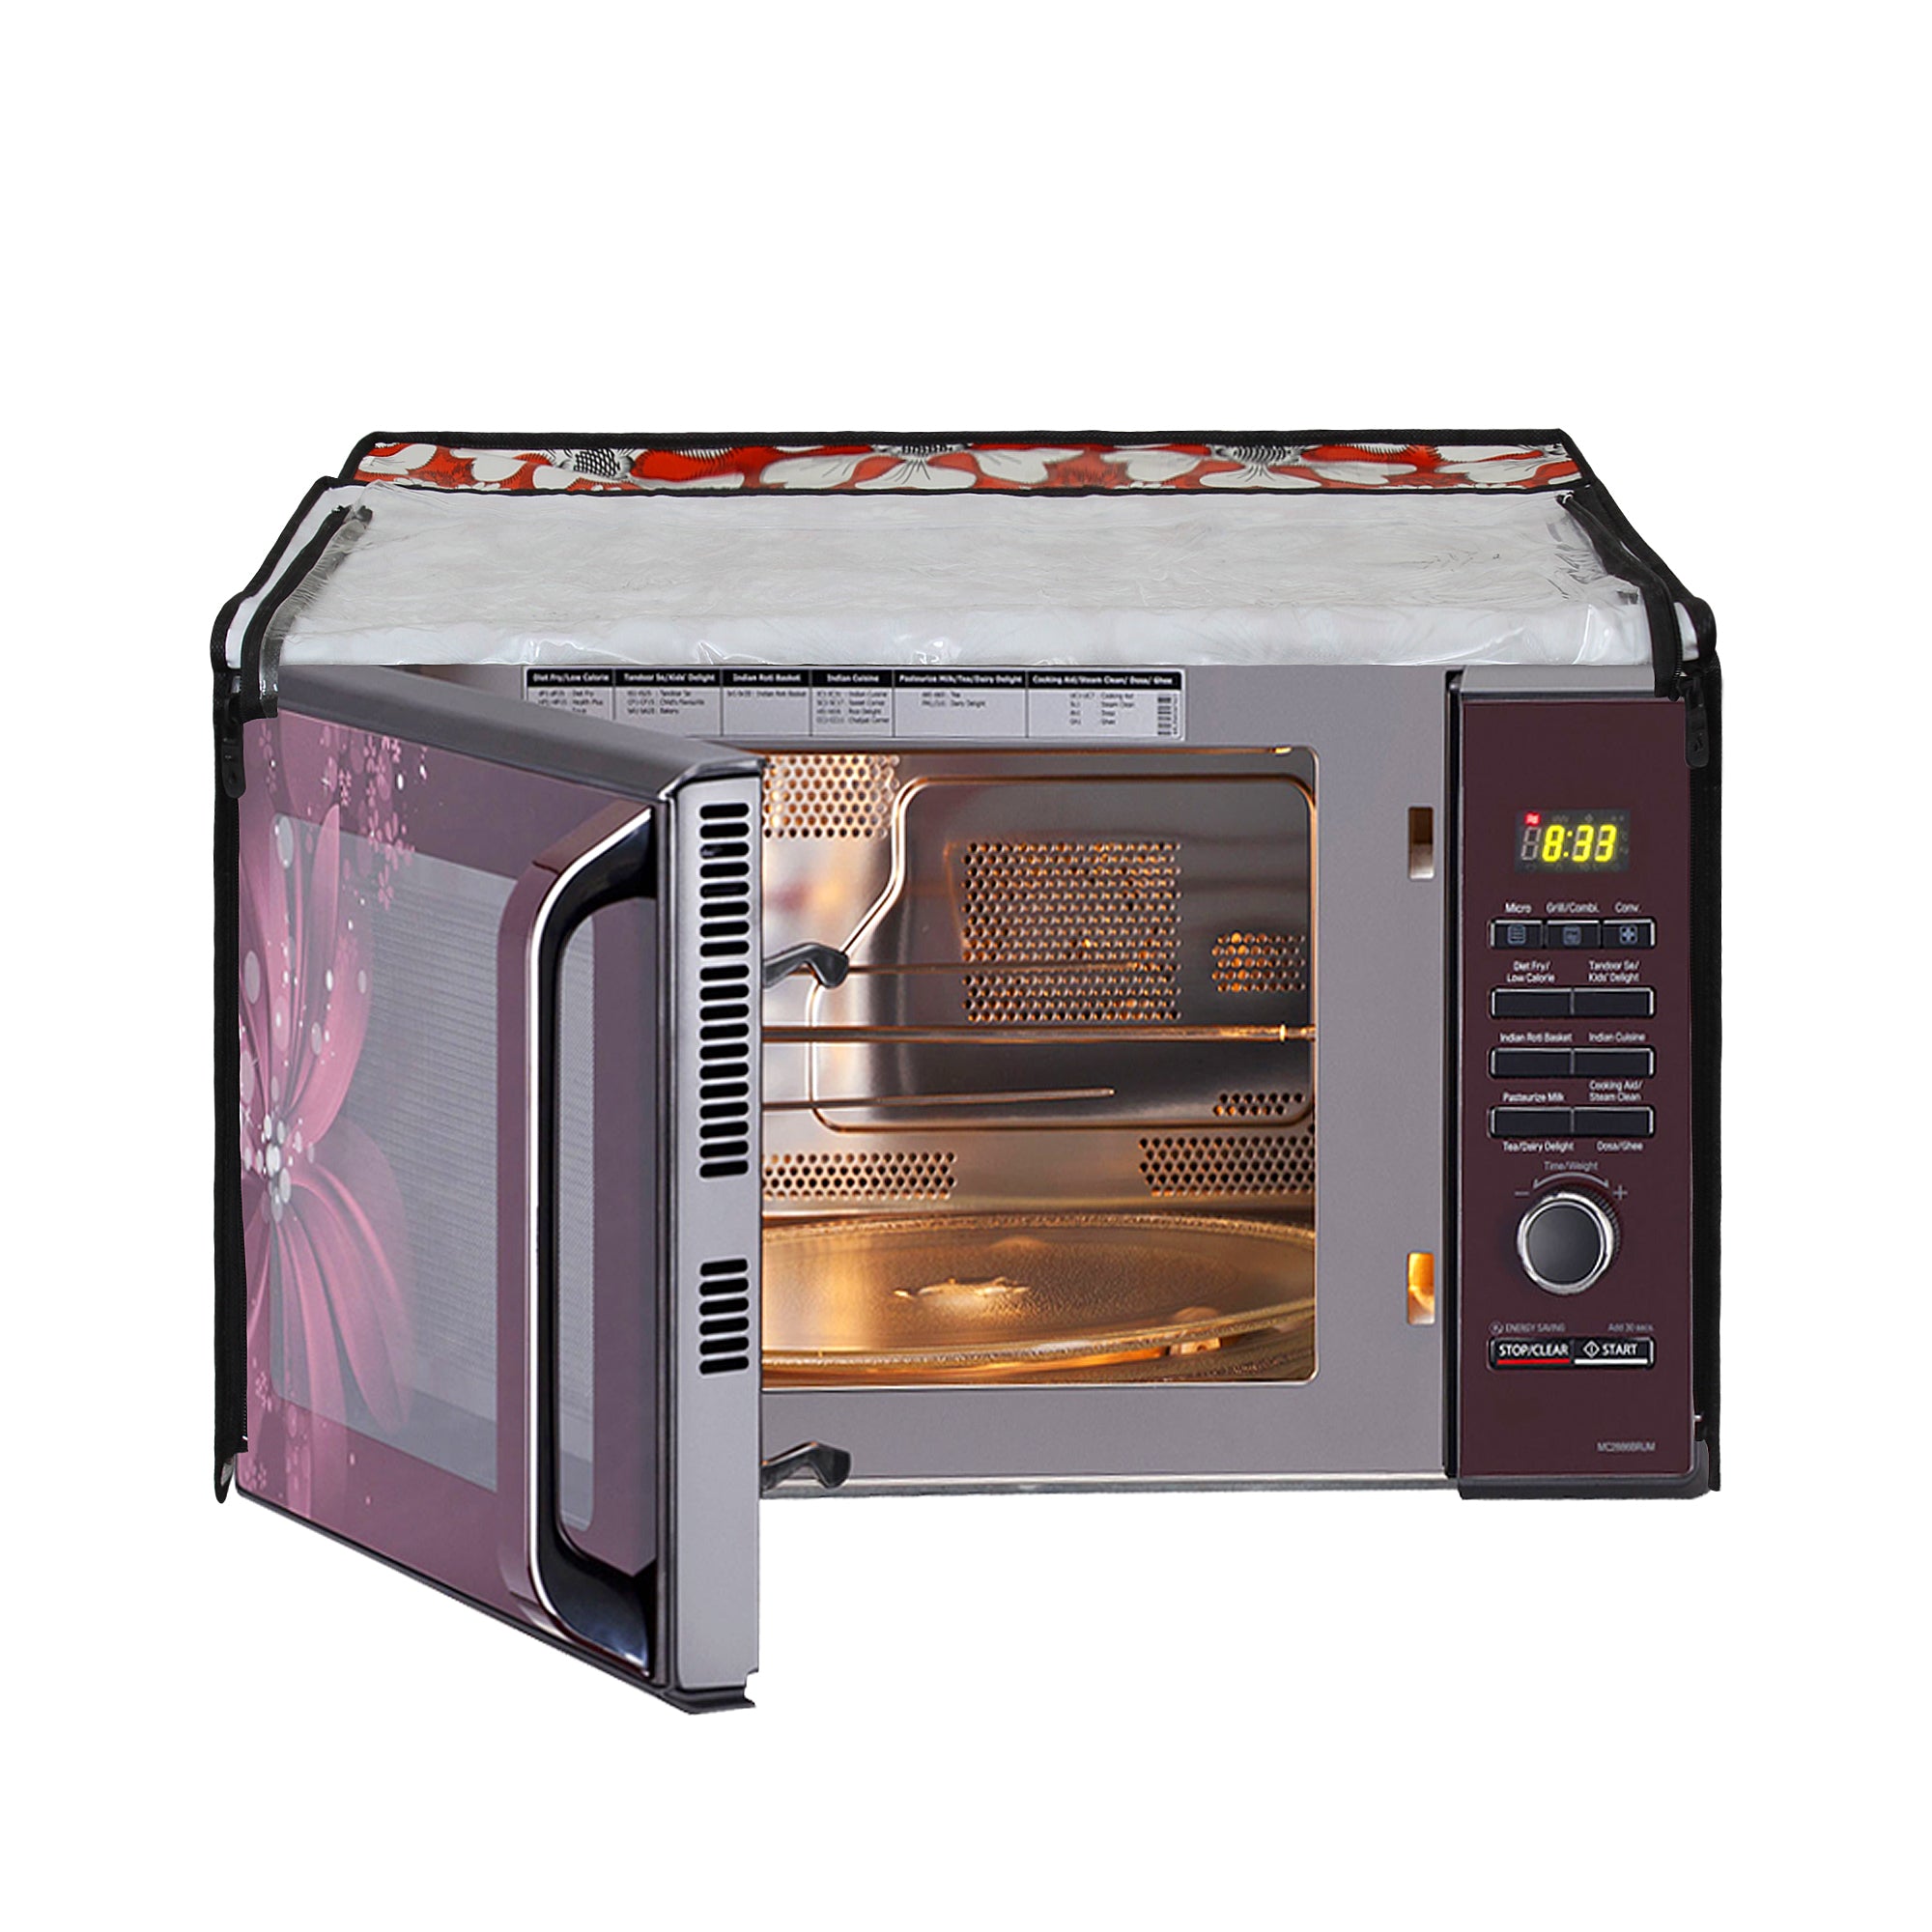 Microwave Oven Cover With Adjustable Front Zipper, SA60 - Dream Care Furnishings Private Limited